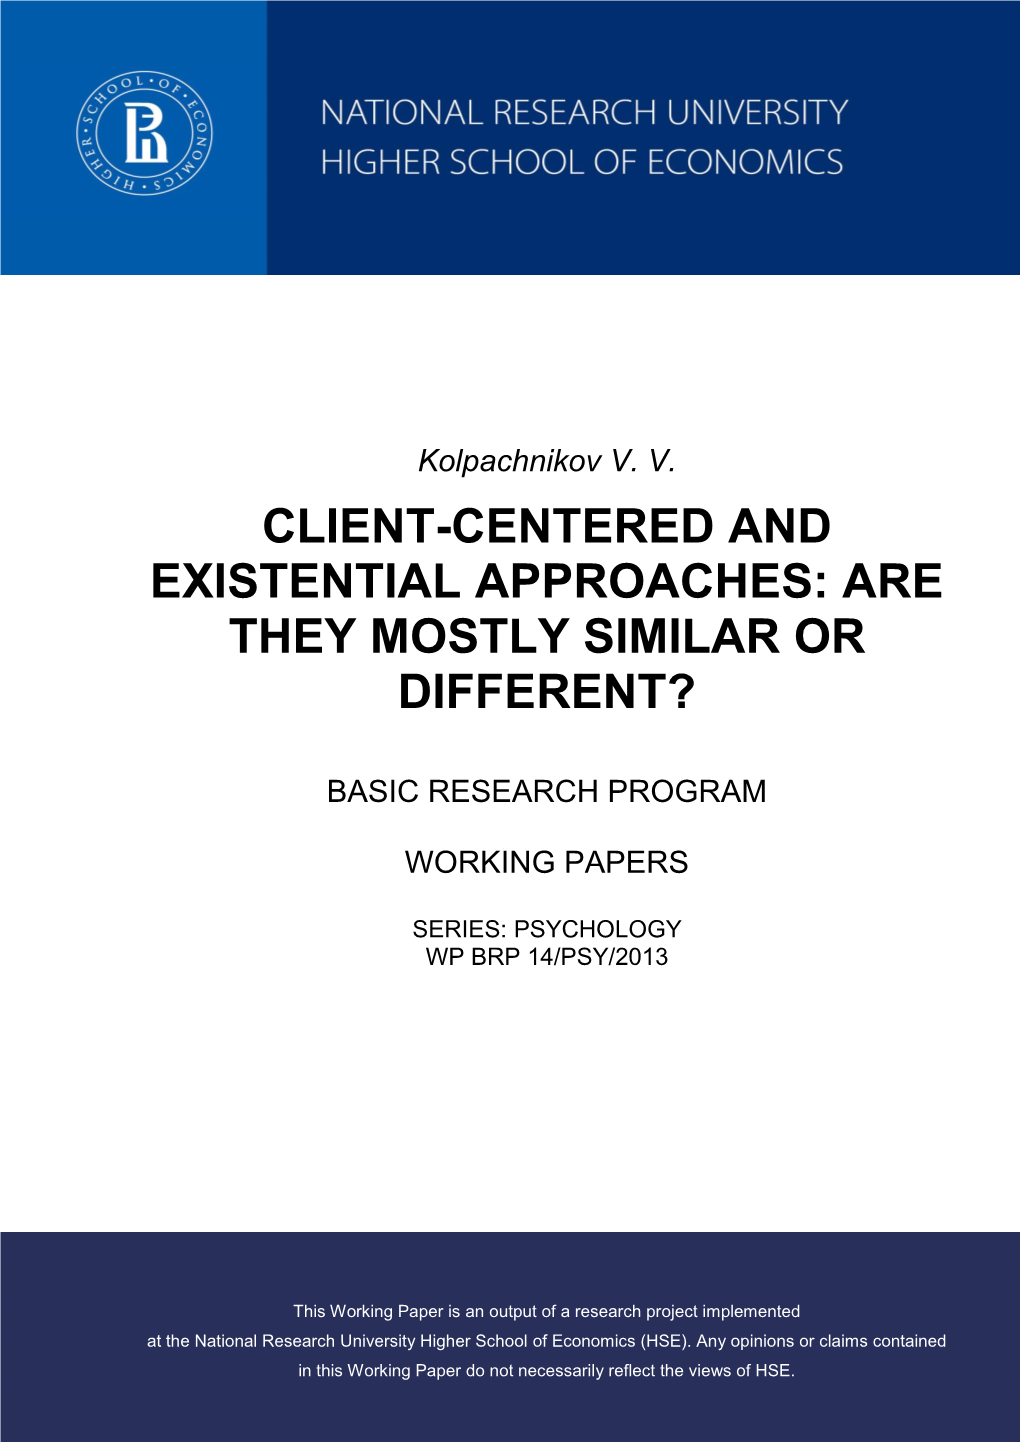 Client-Centered and Existential Approaches: Are They Mostly Similar Or Different?